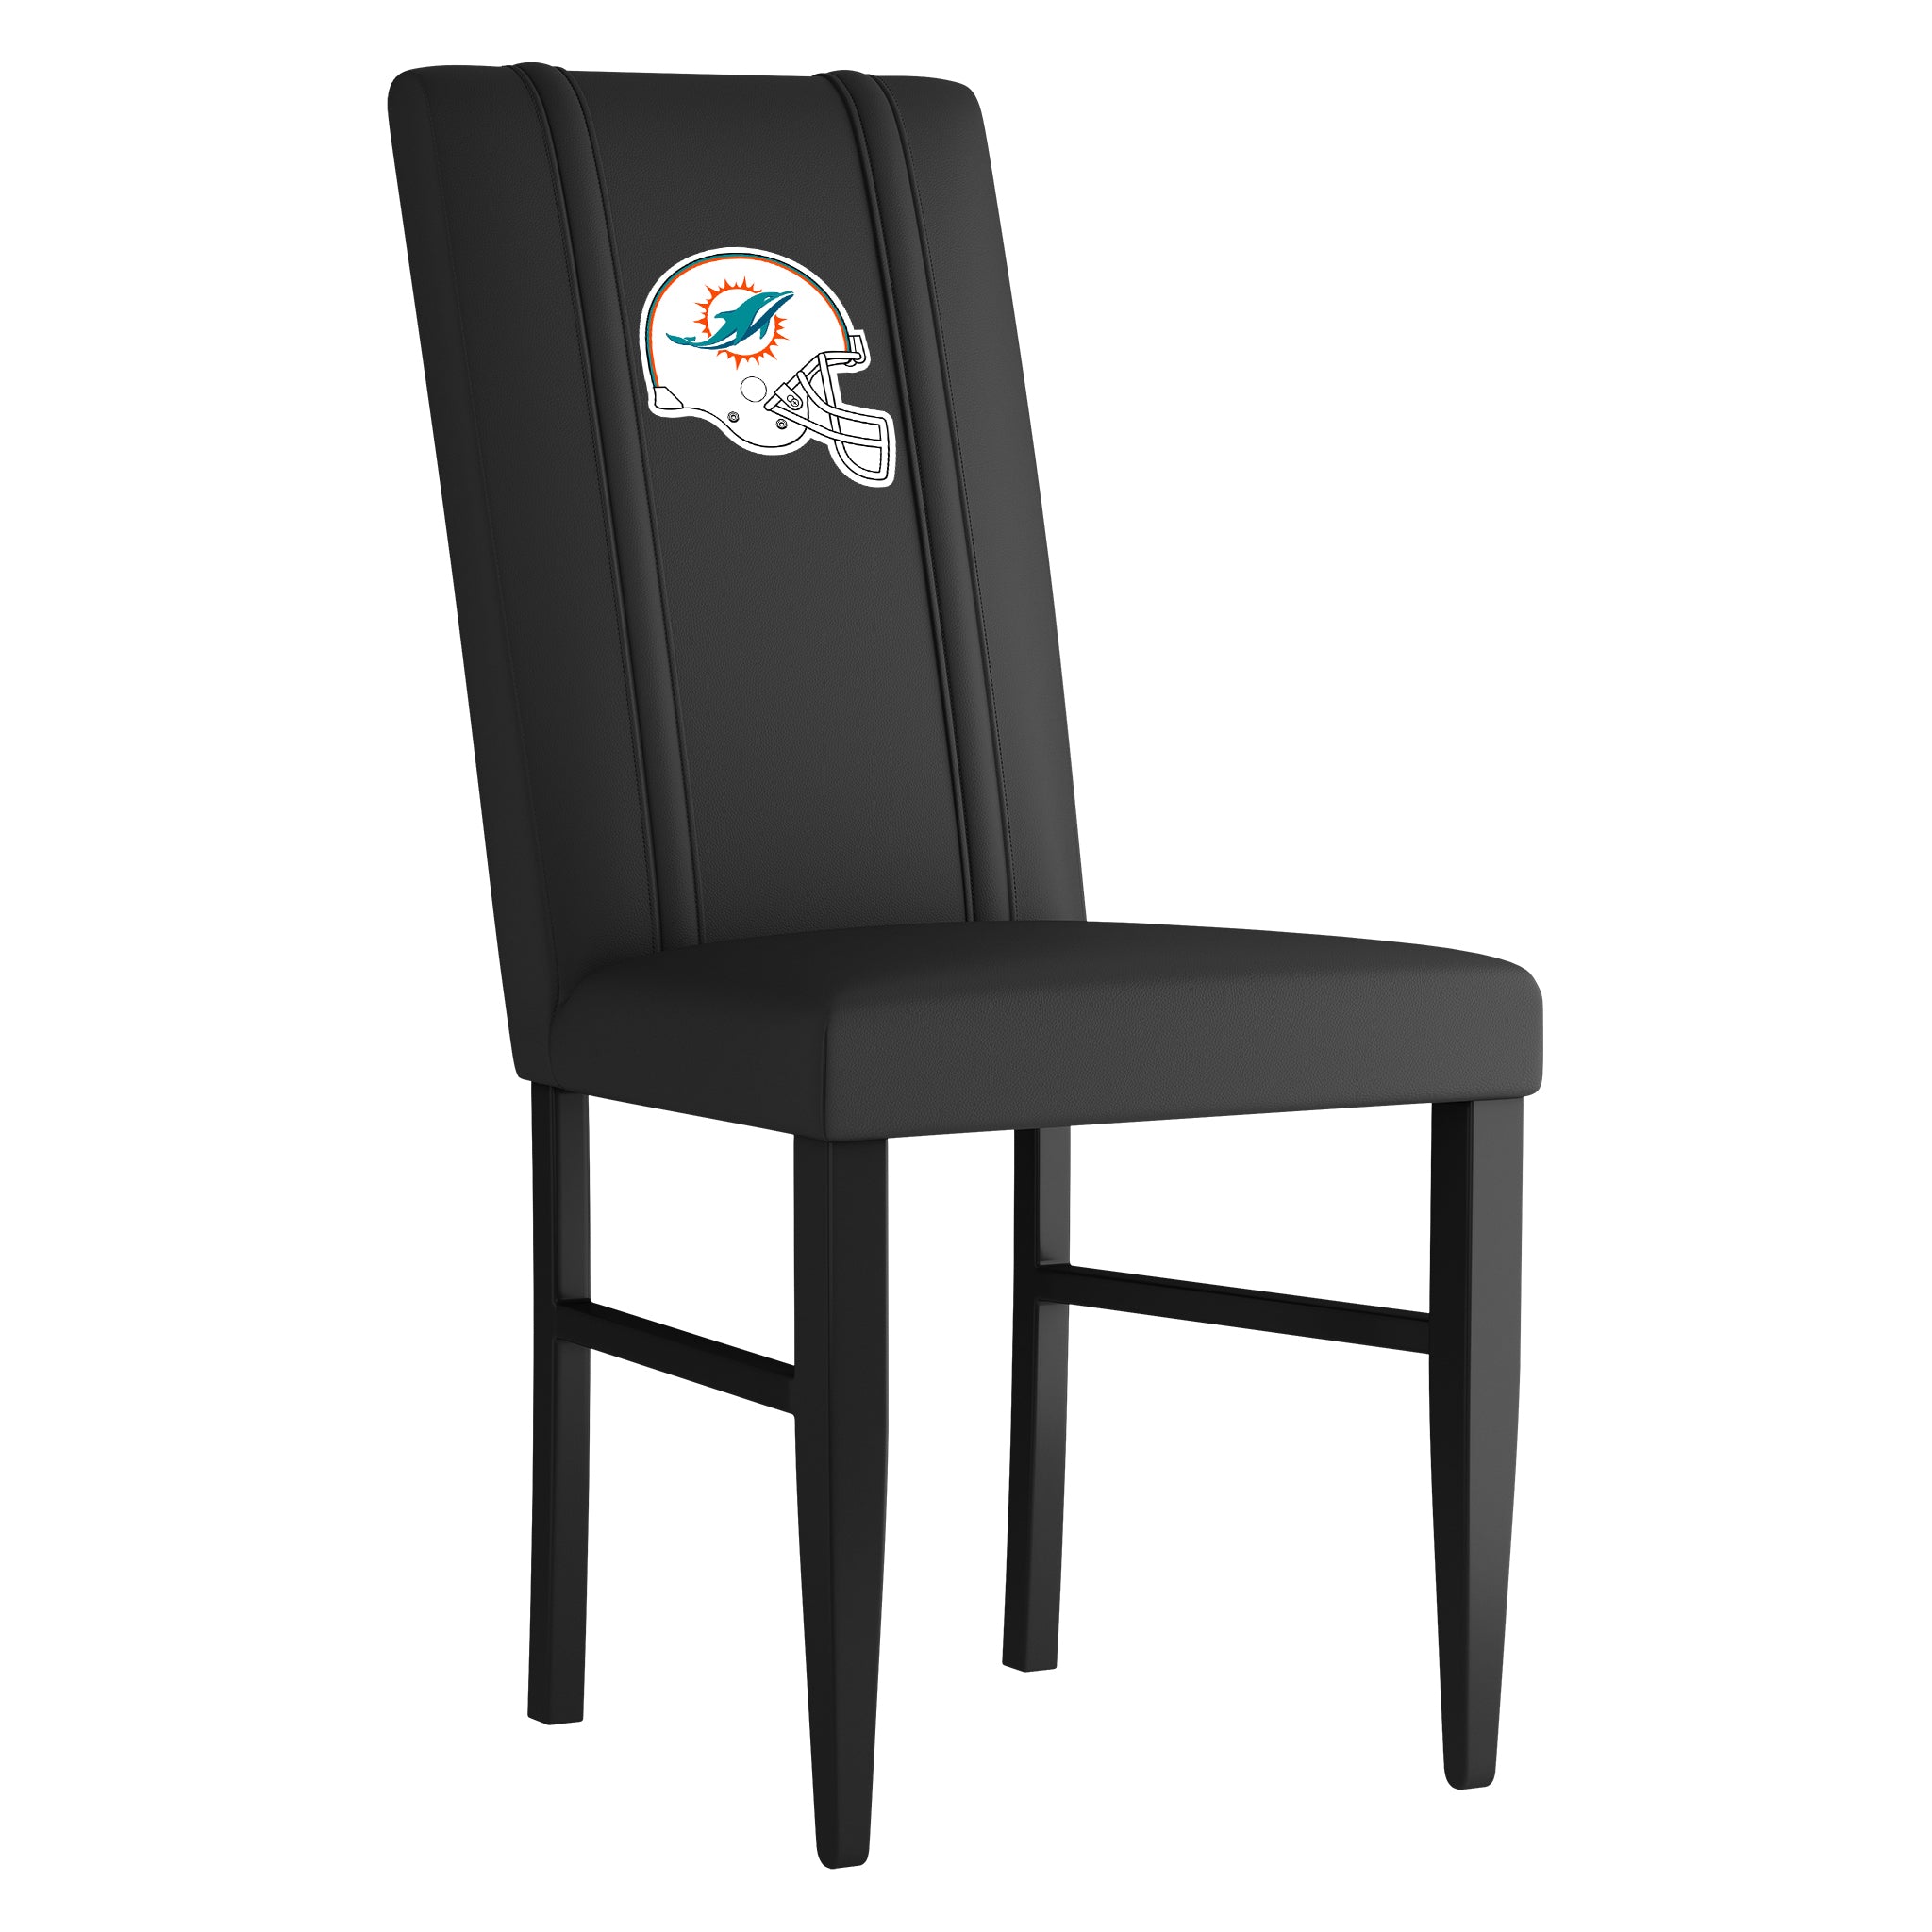 Side Chair 2000 with  Miami Dolphins Helmet Logo Set of 2